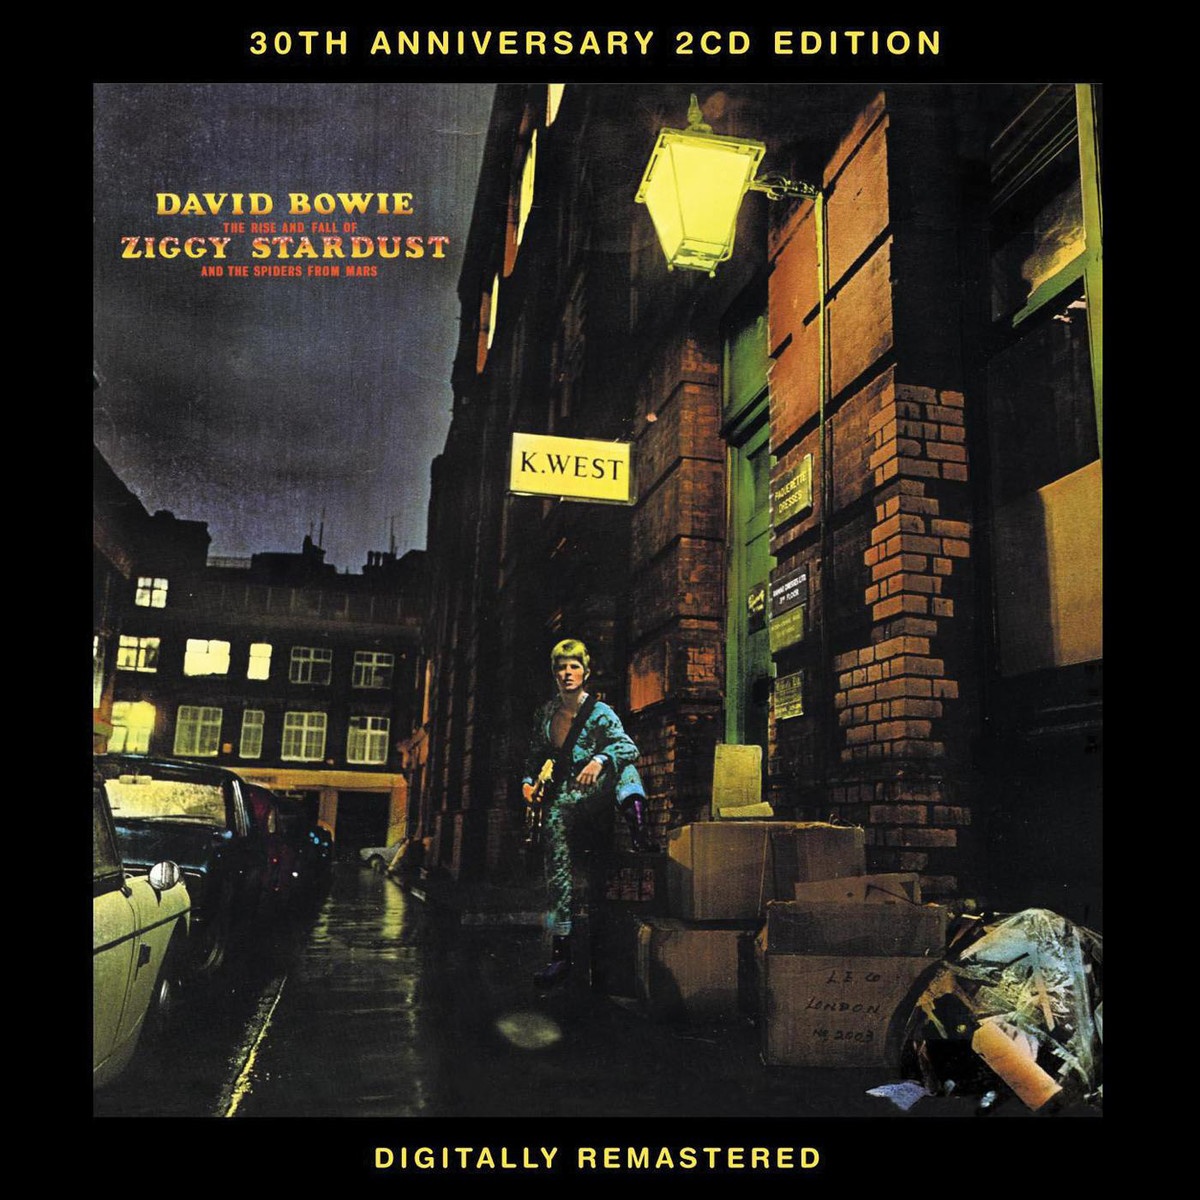 The Rise And Fall Of Ziggy Stardust And The Spiders From Mars (2012 Remastered Version)